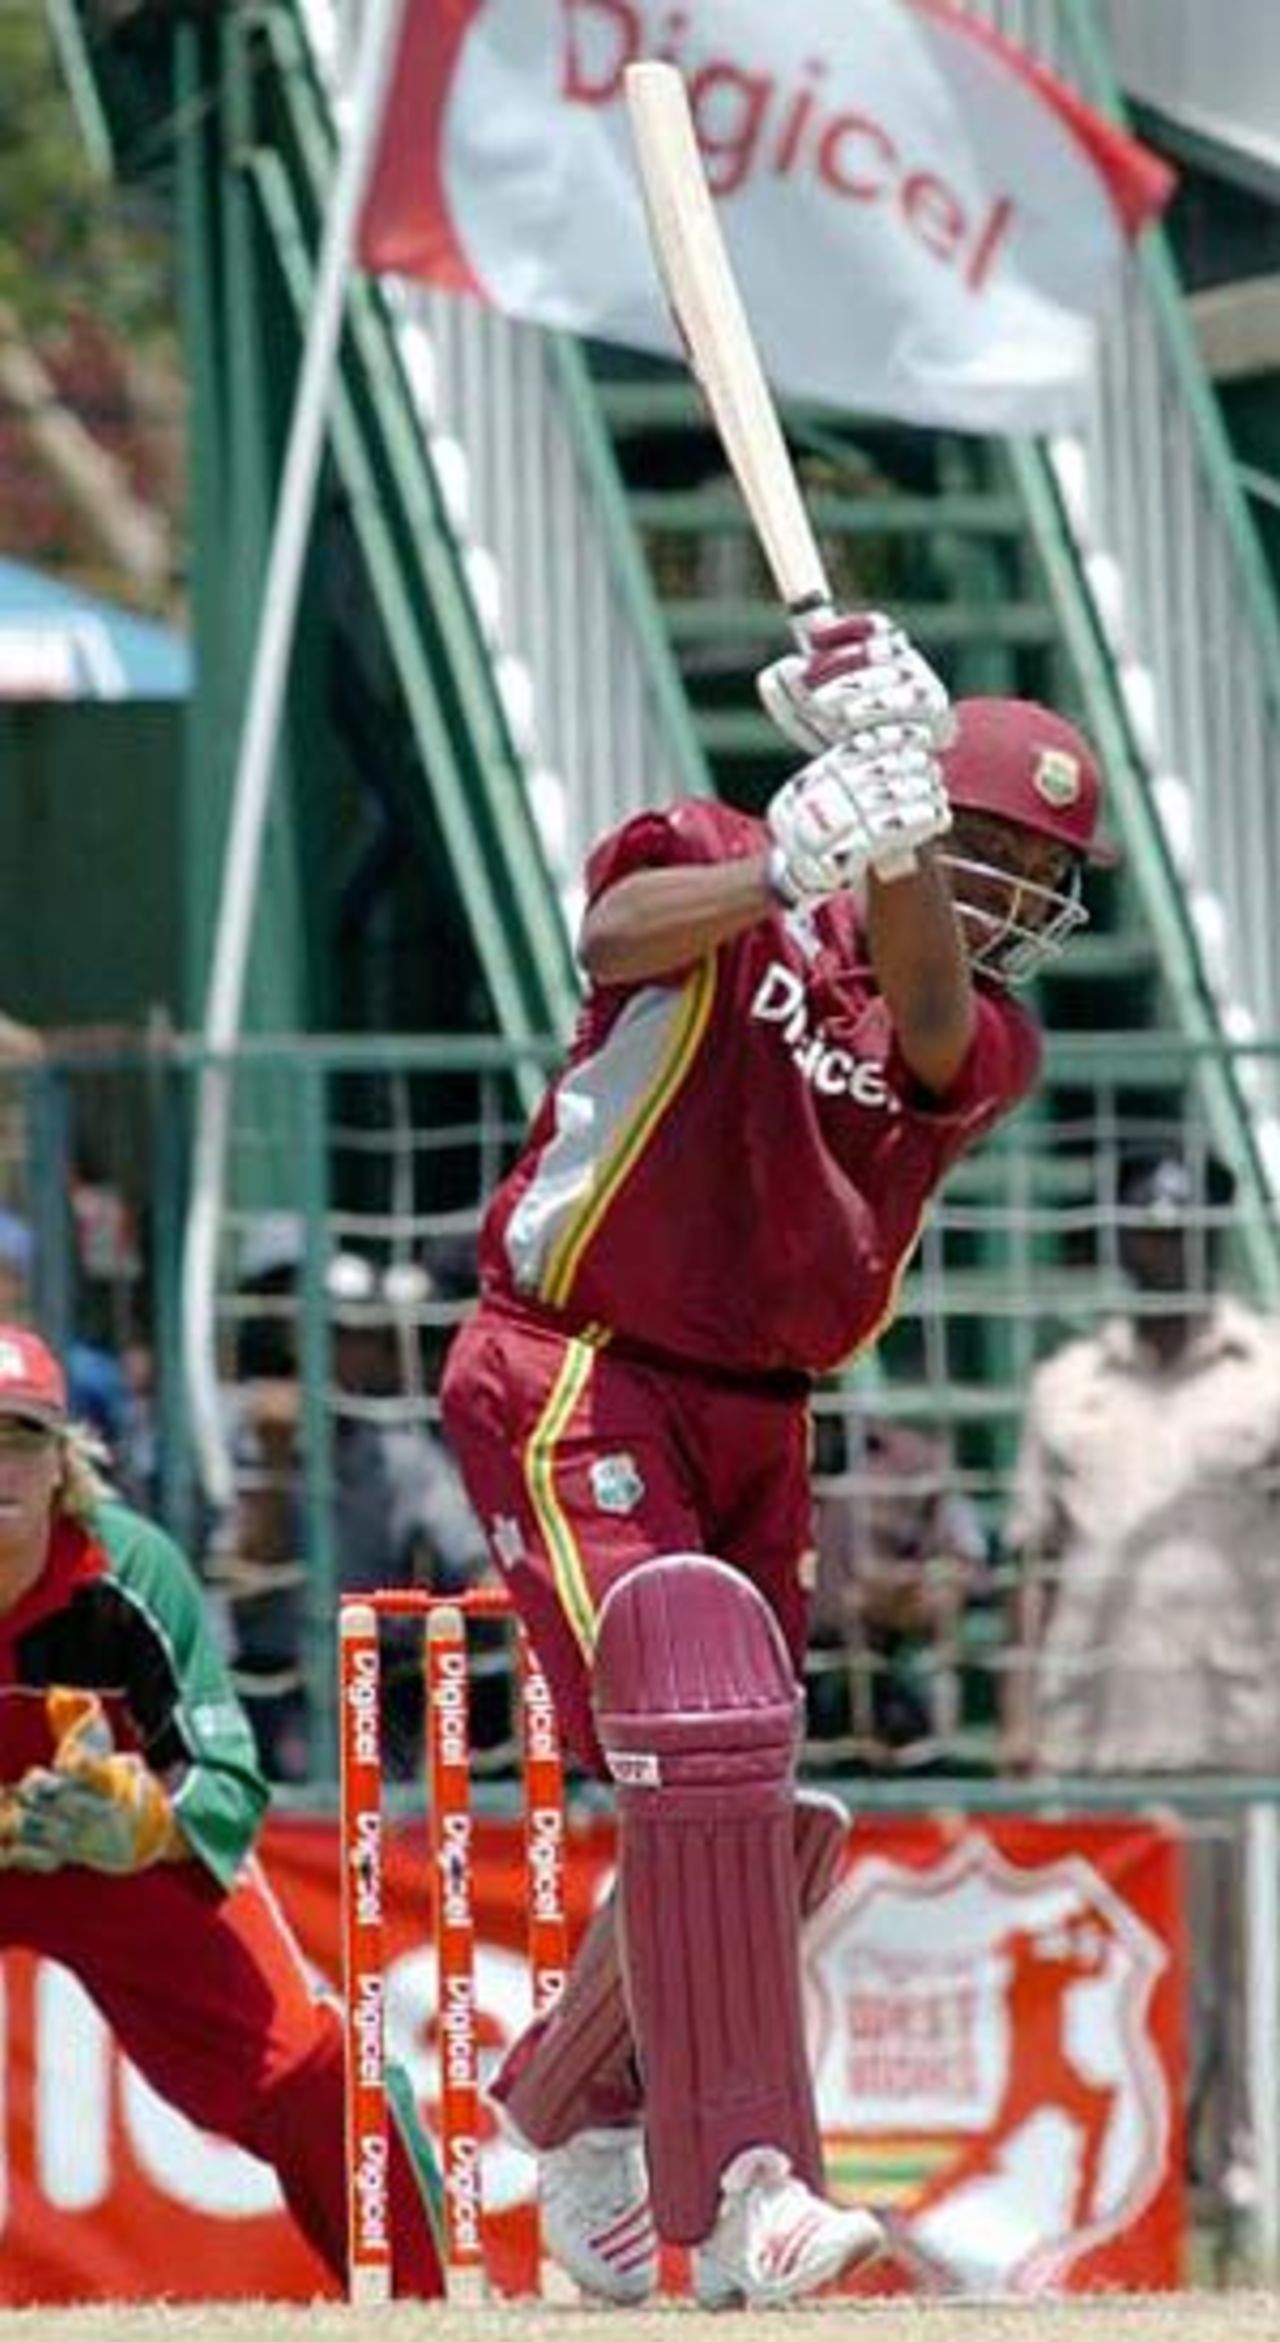 West Indies captain Brian Lara averages 55 in Trinidad and will want to put on a show for his home fans